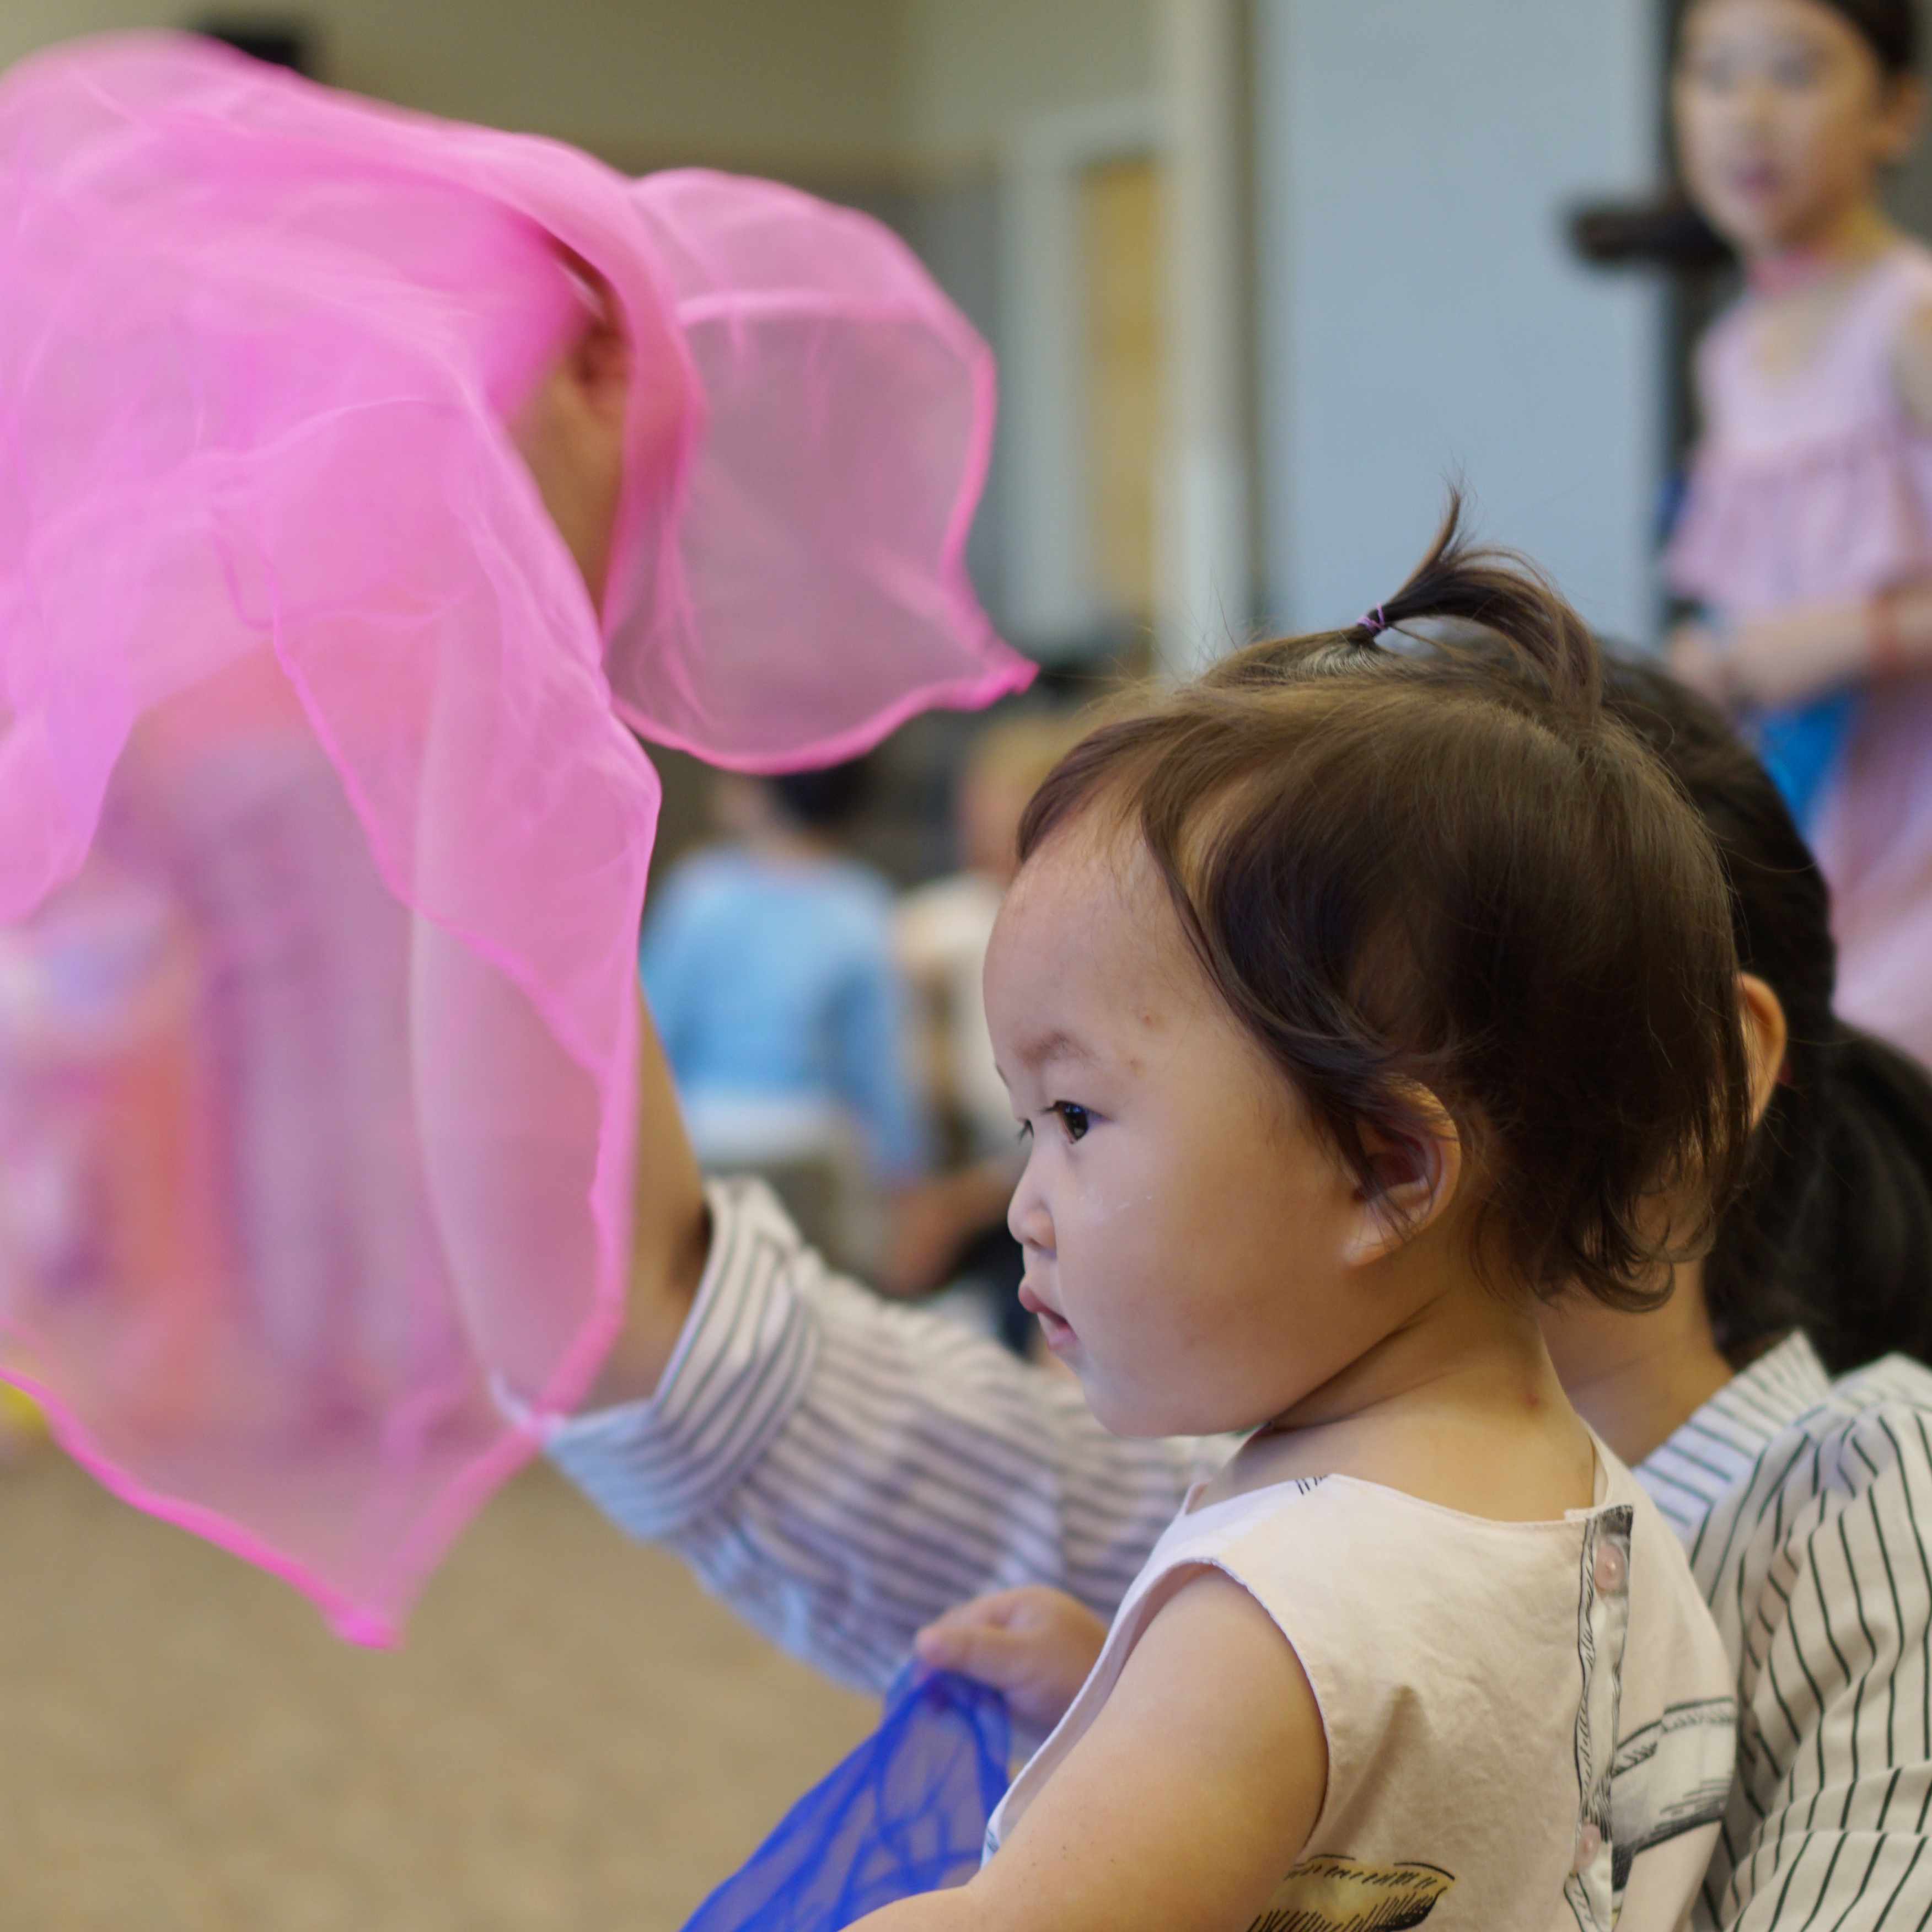 Baby and caregiver playing with a pink scarf during Baby Storytime.